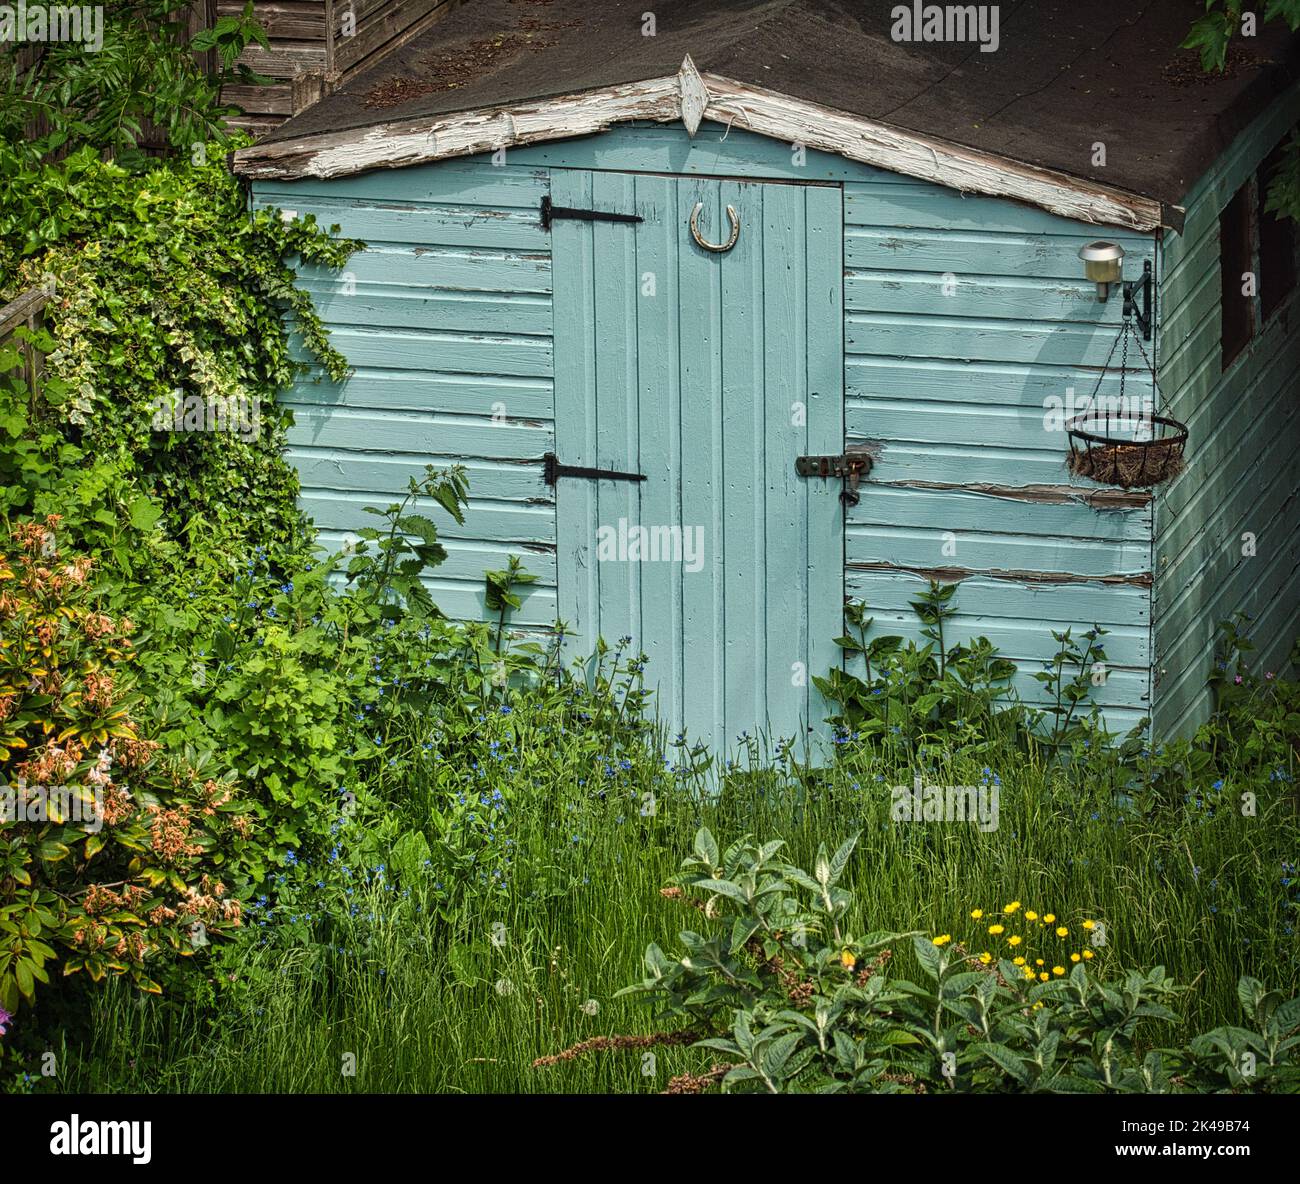 Garden shed swamped in plants Stock Photo